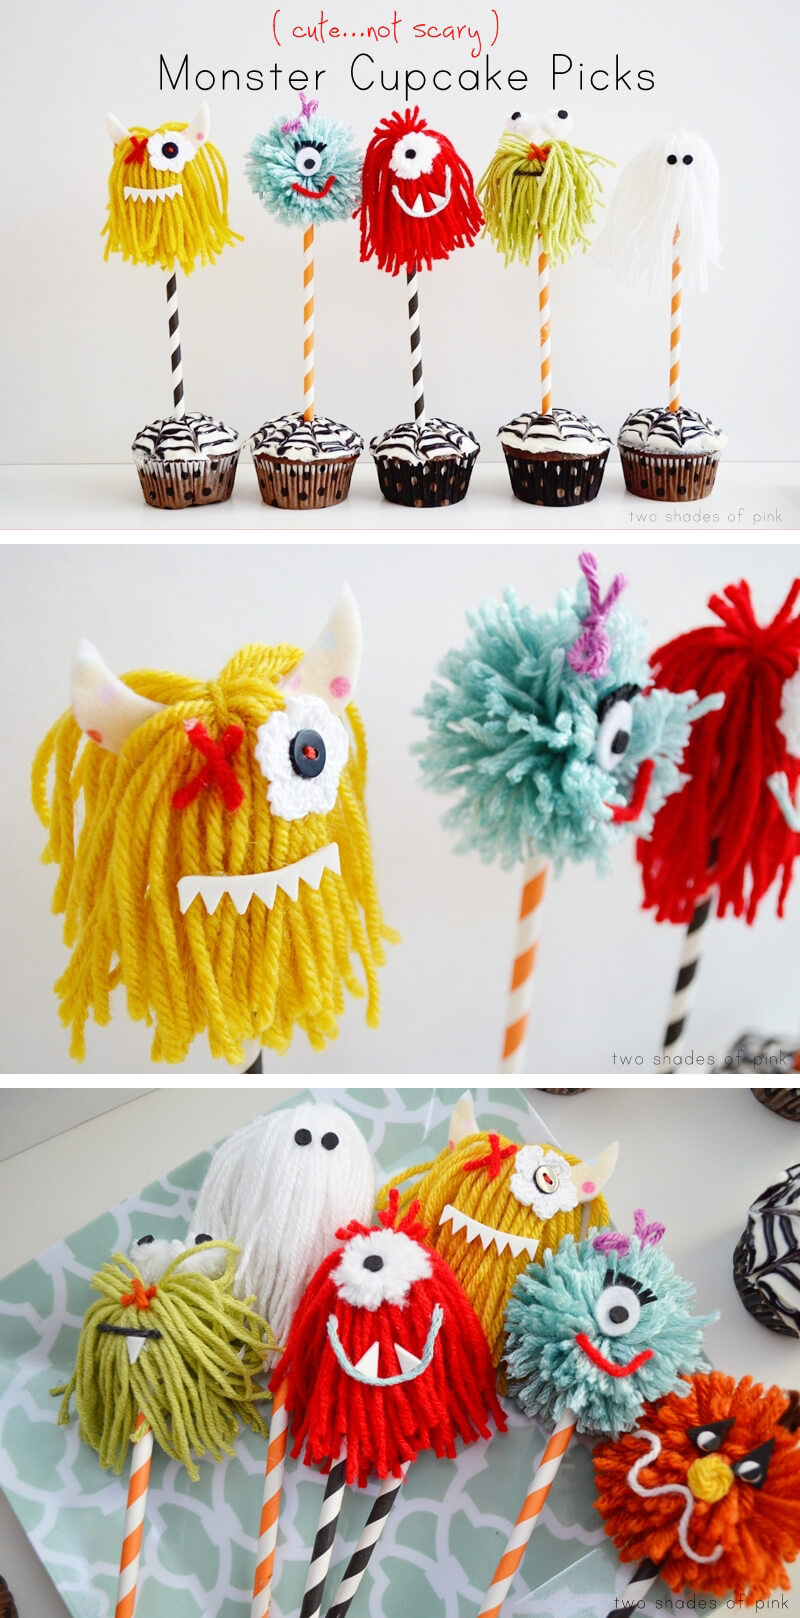 Cheering for Monster Cupcakes | Awesome DIY Halloween Party Decor | BHG Halloween